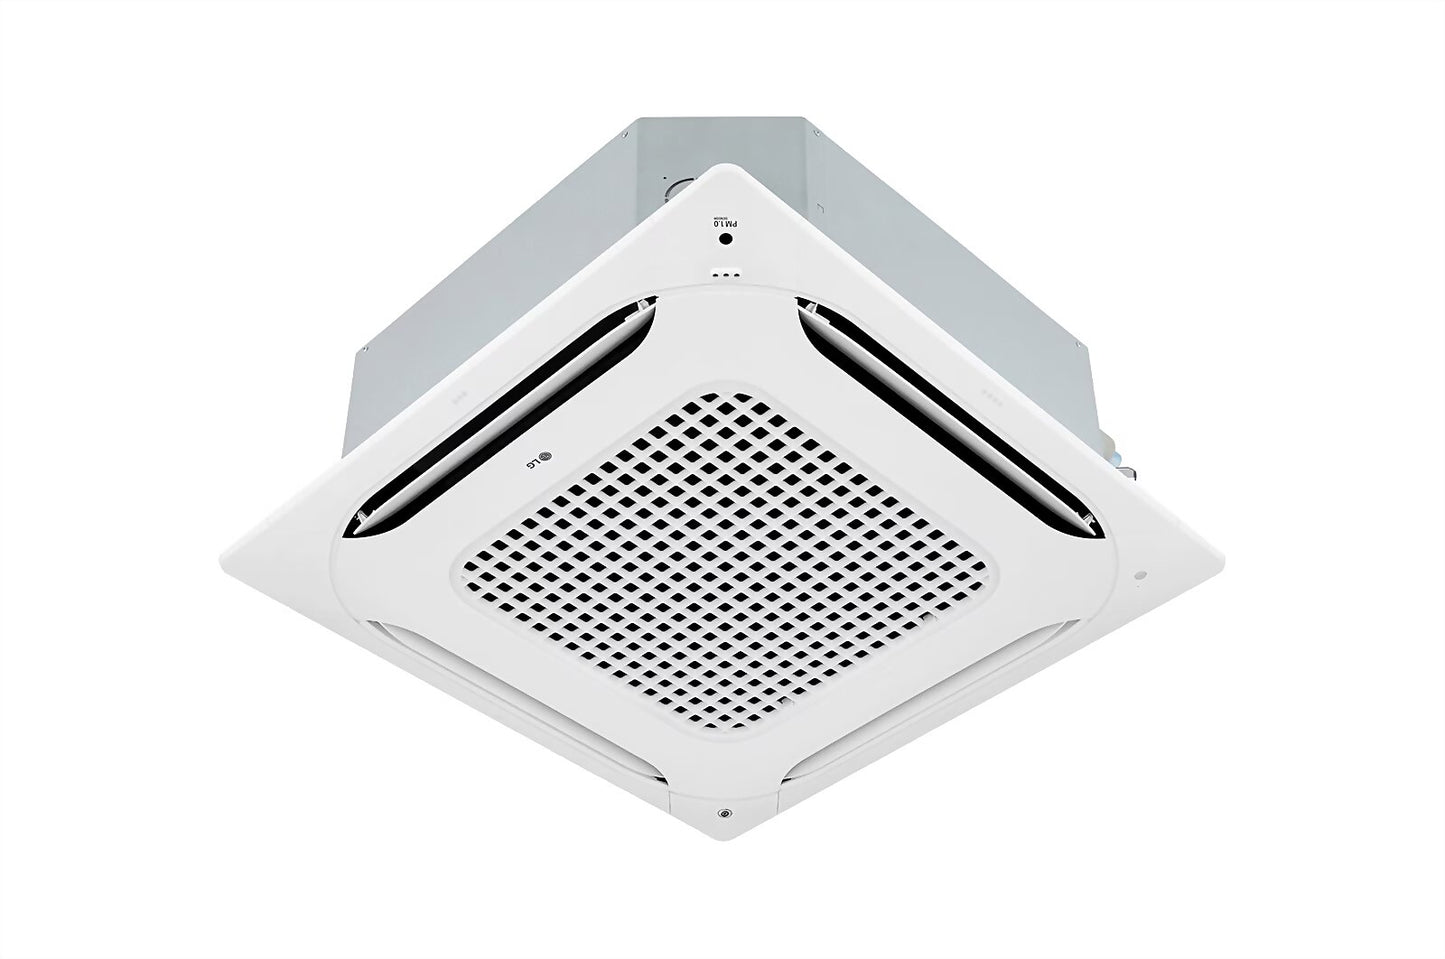 LG Ceiling Mounted 4 Way Cassette Inverter AC 15.8KW with Advanced Air Purification and Independent Vane Control - ARNU54GTMC4